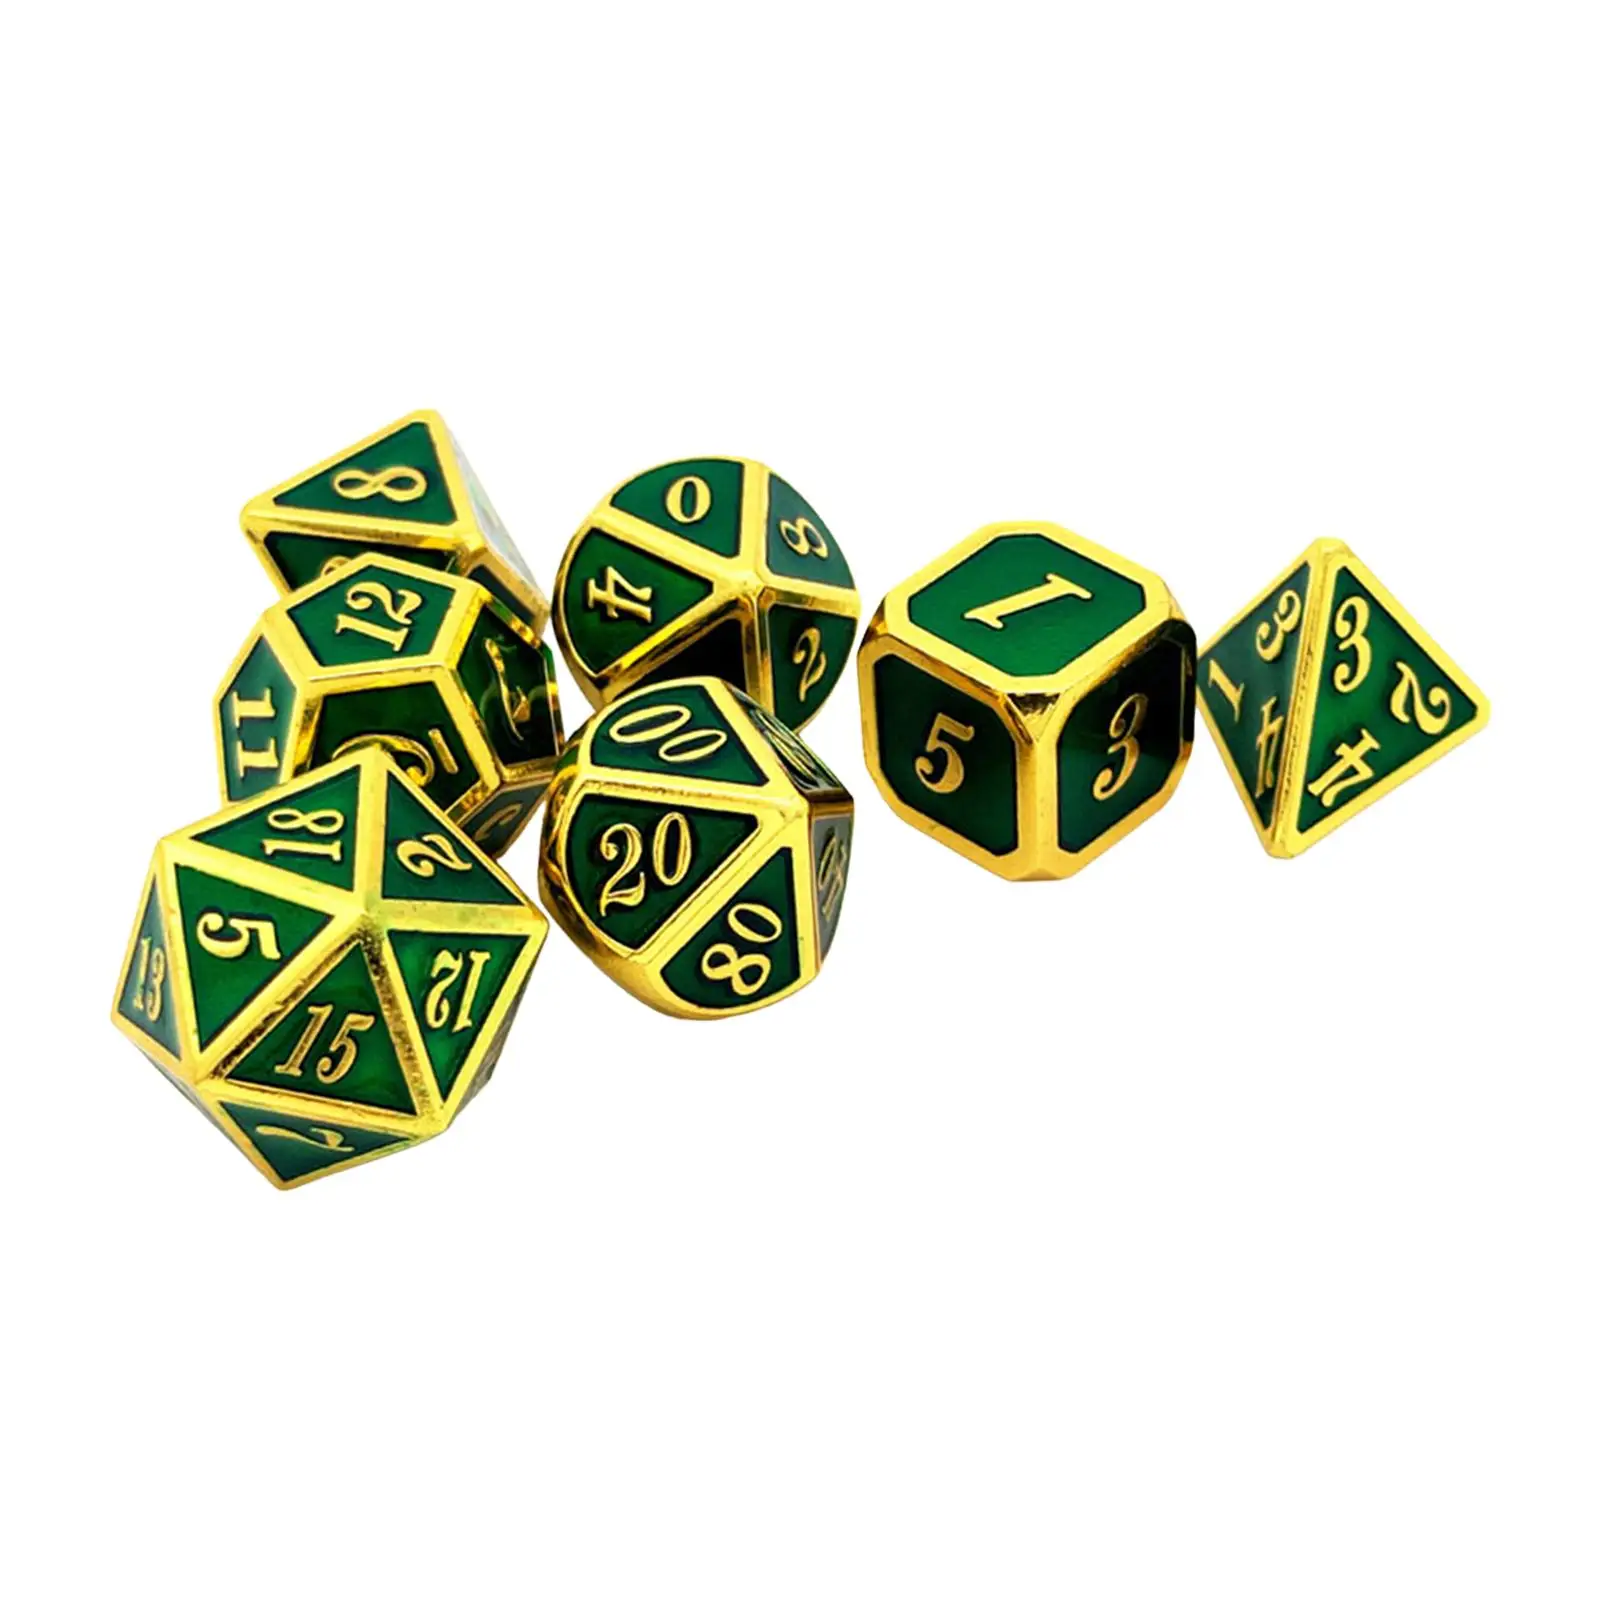 Polyhedral Game Dice 7 Pieces Set Handmade Wear Resistant Multifunctional Role Playing Dice Accessory for Teaching Projects